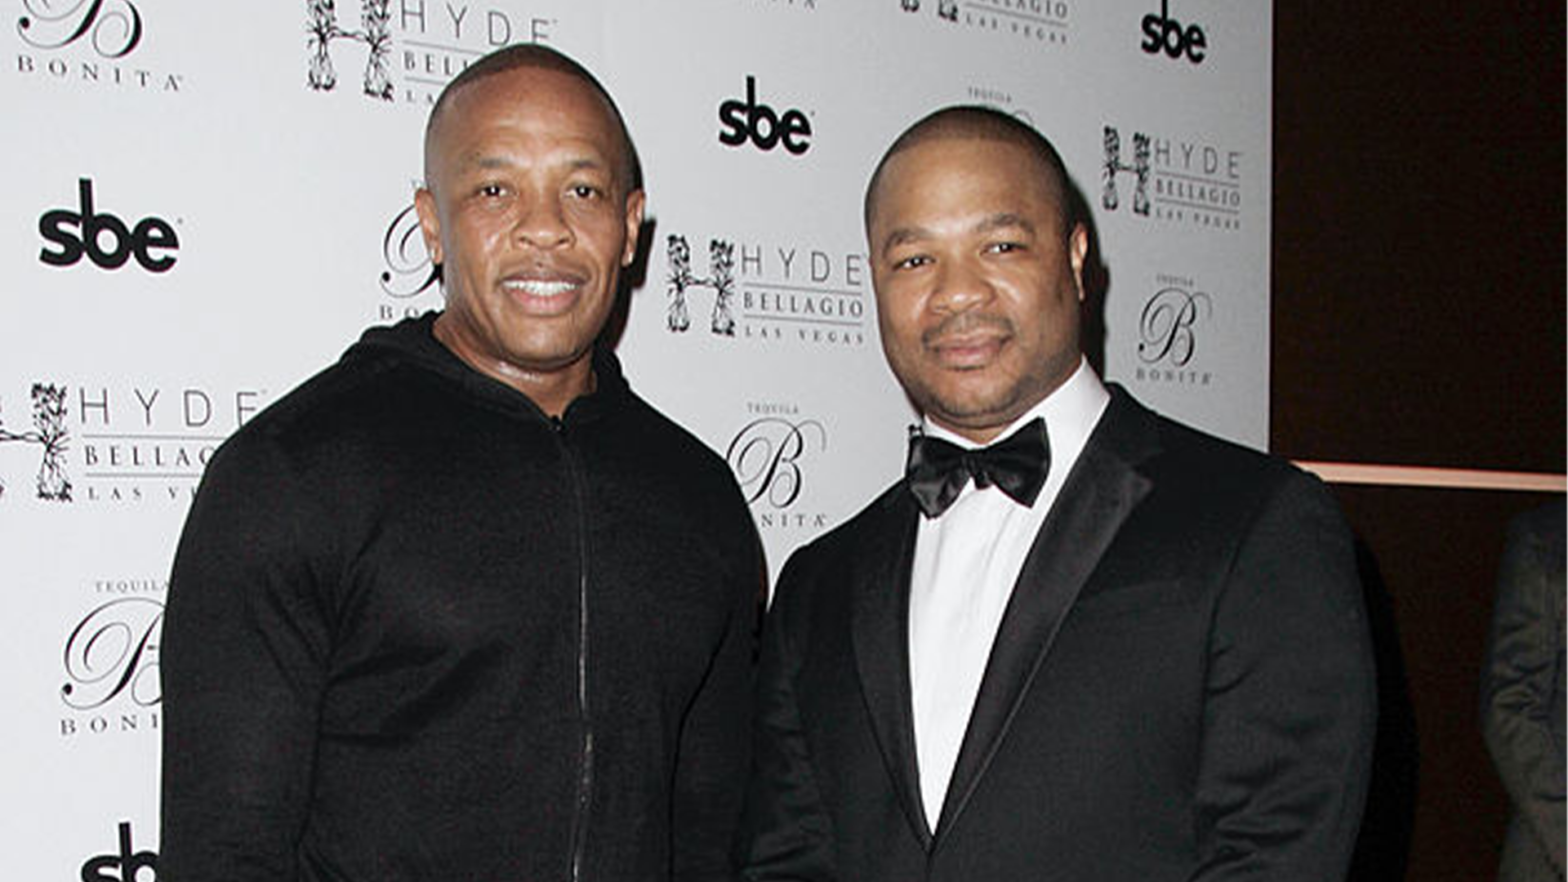 After A Four-Year Battle, Dr. Dre And Xzibit Win Lawsuit Against Their Weed Brand Brass Knuckles